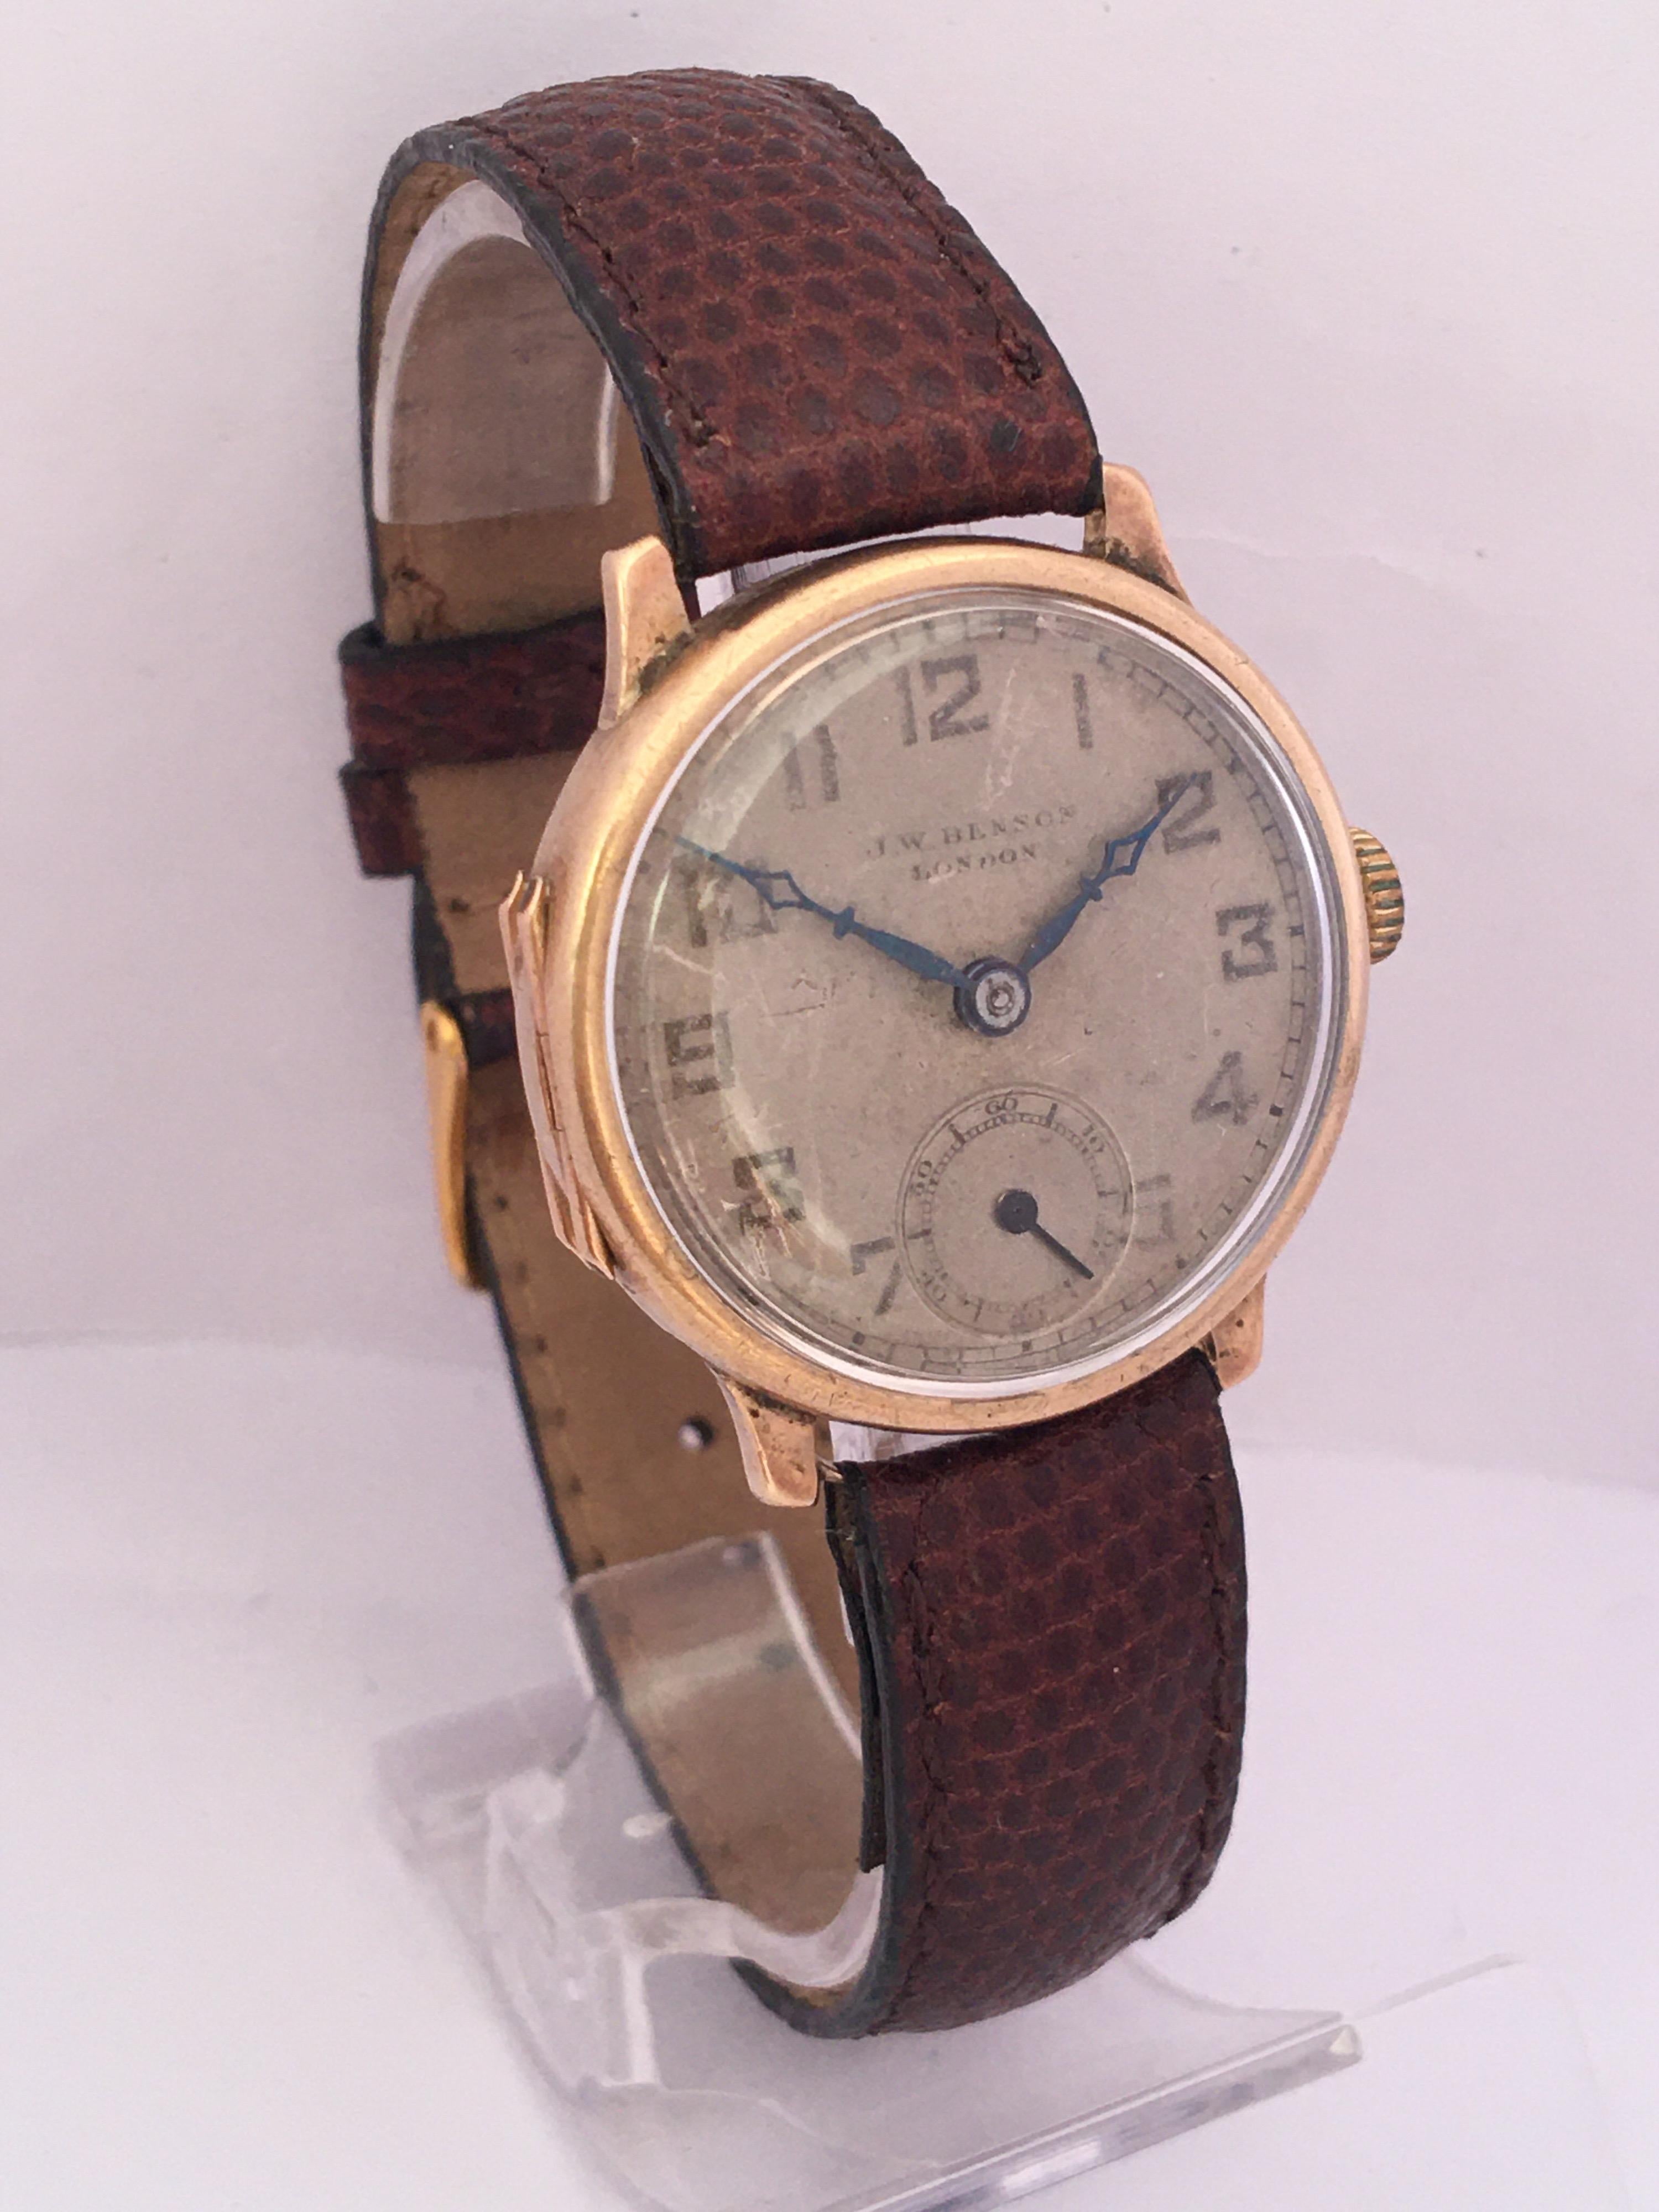 This beautiful pre-owned 30mm diameter hand winding watch is in good condition and it is recently been serviced and runs well. Visible signs of ageing and wear with light scratches on the gold watch case. The silvered dial is a bit worn and dated as